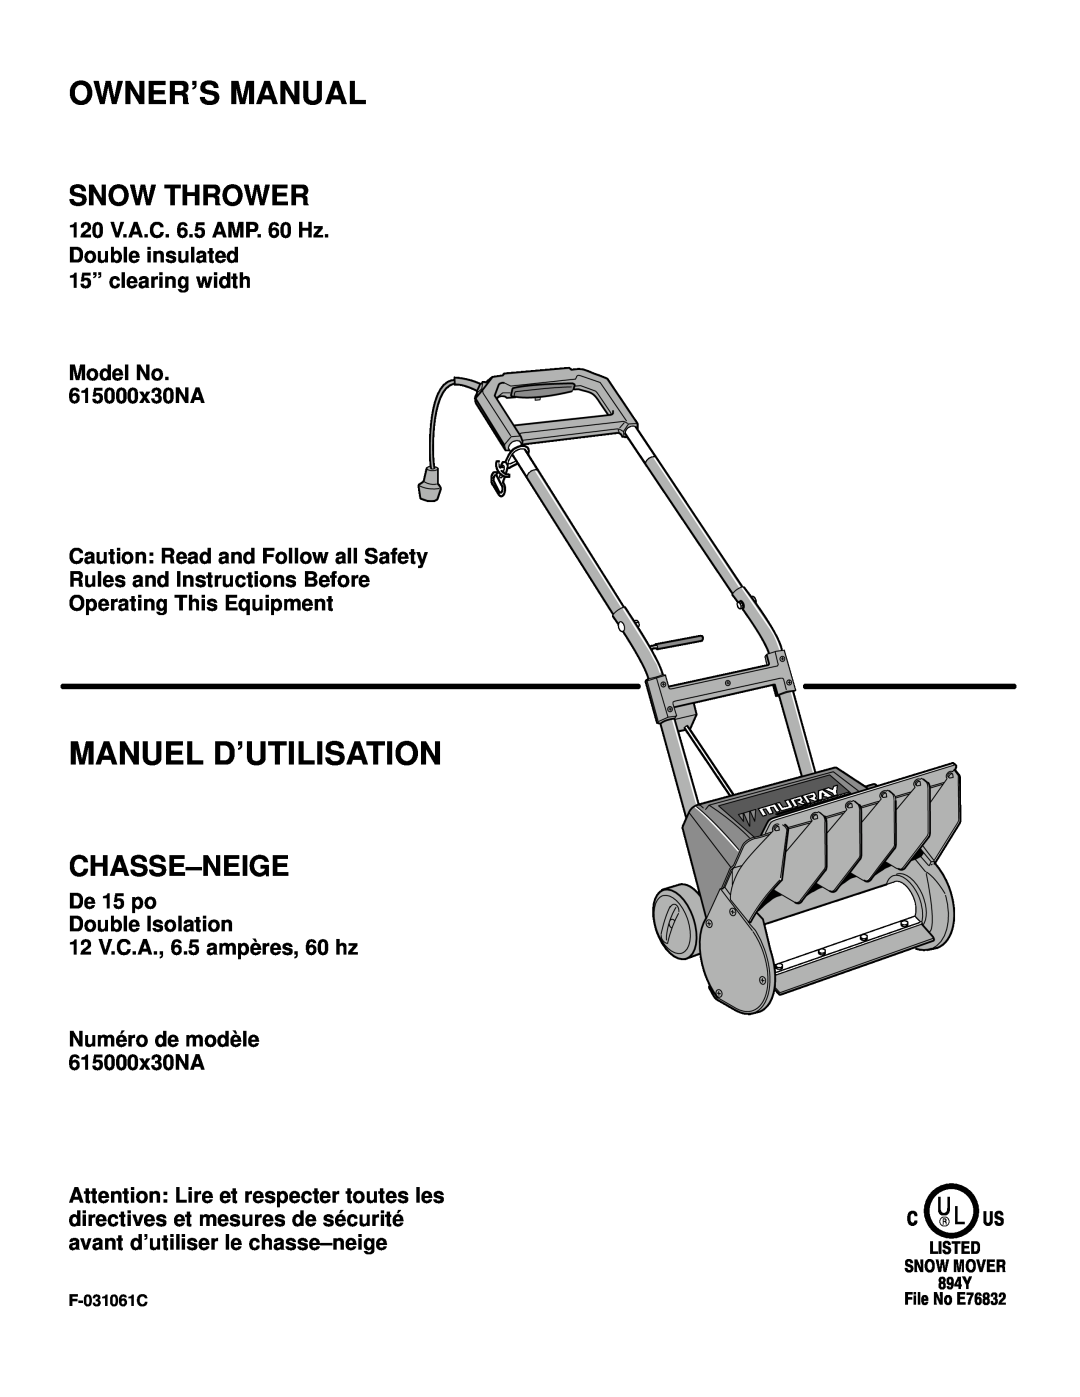 Murray 615000x30NA owner manual Manuel D’Utilisation, Snow Thrower, Chasse-Neige 